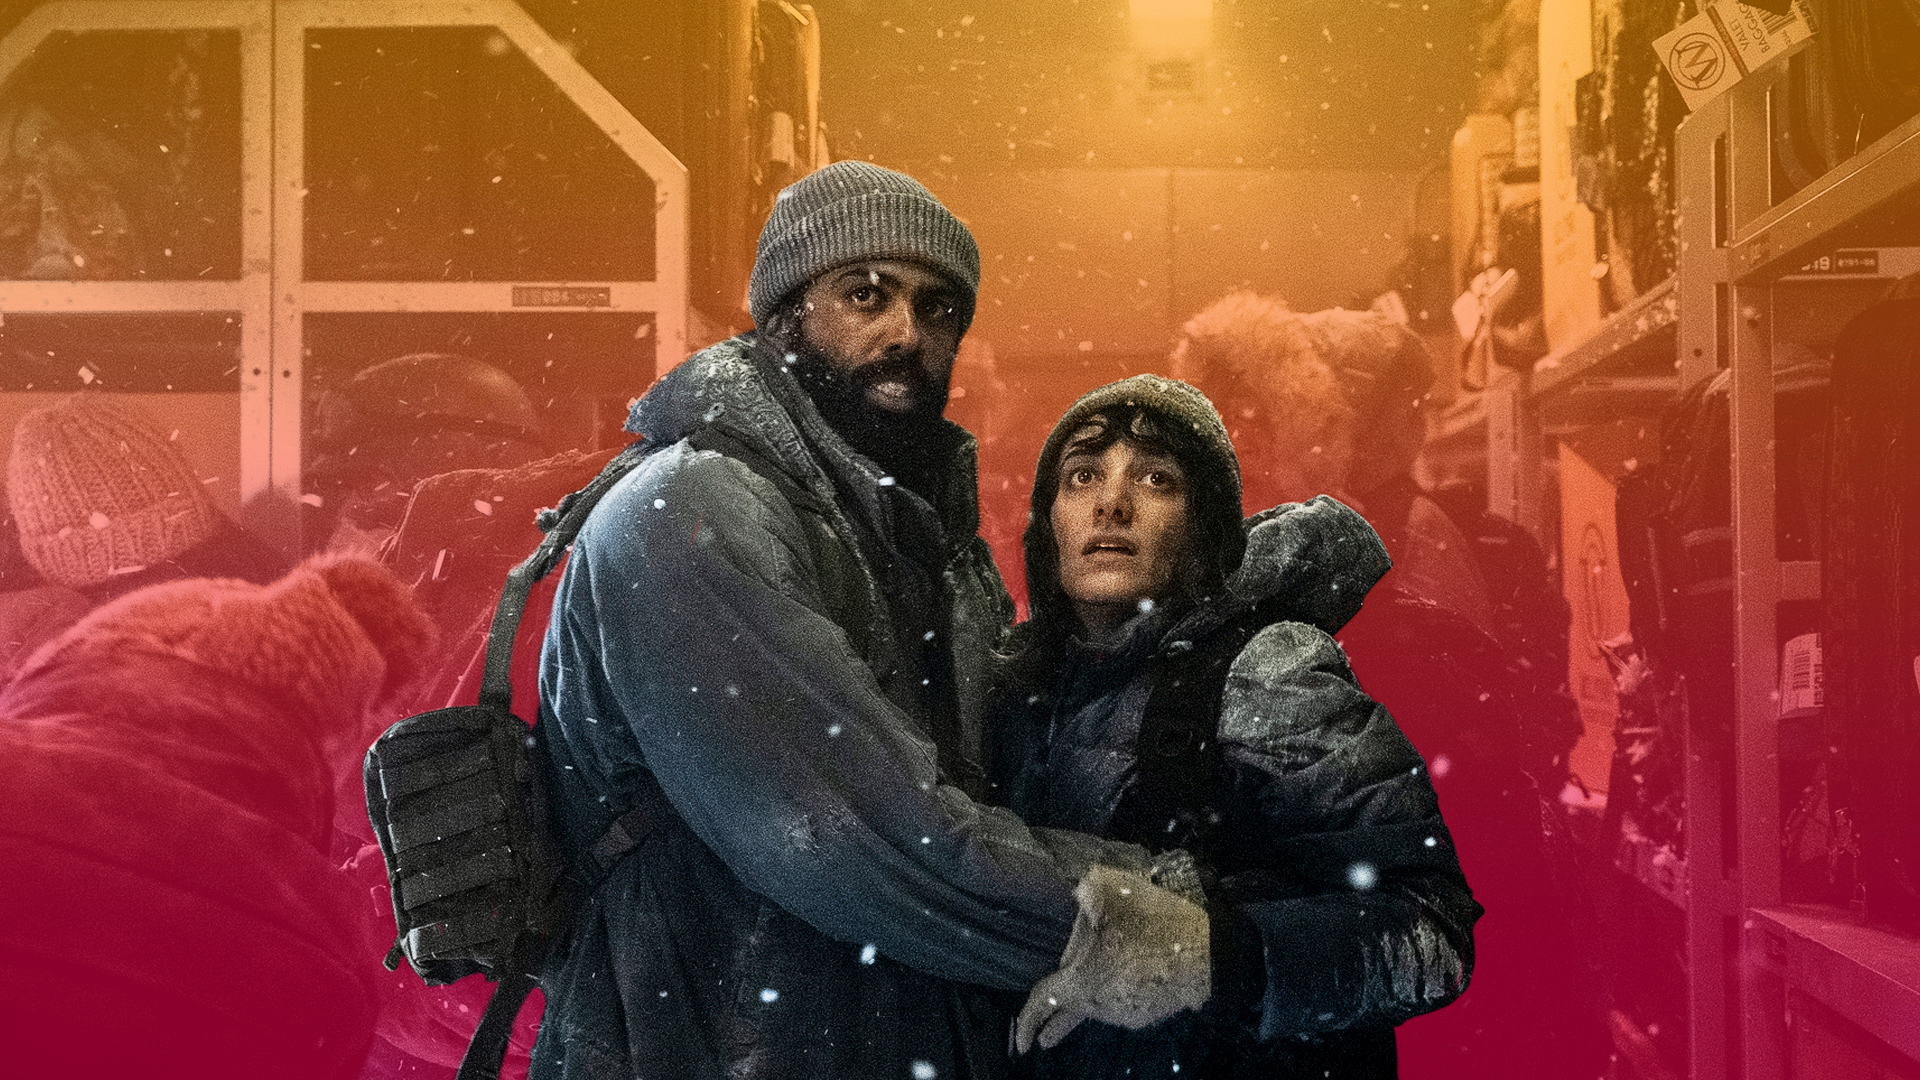 A man and woman dressed in bulky coats and heavy winter gear clutch each other and look fearfully offscreen as snow falls around them in TNT’s Snowpiercer series.